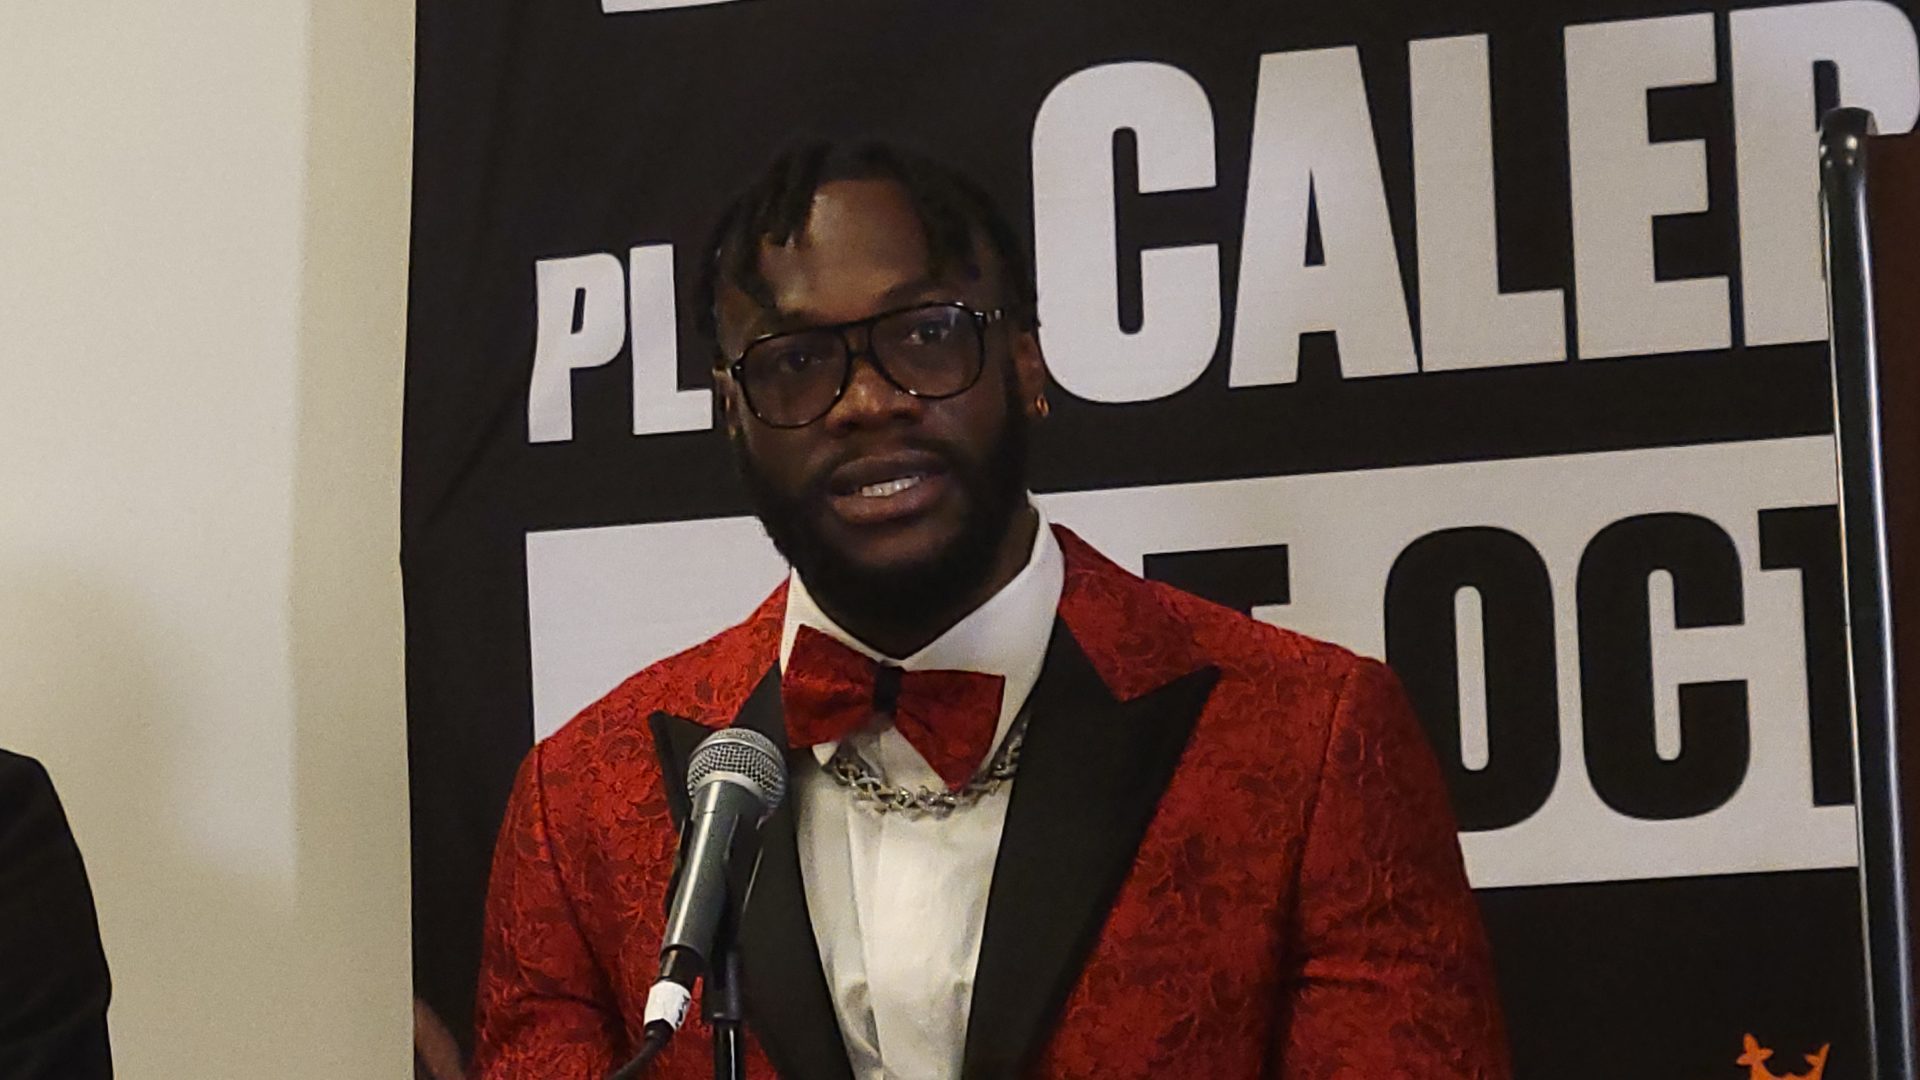 Deontay Wilder speaks to the media after his knockout win (Photo by Derrel Jazz Johnson for rolling out)